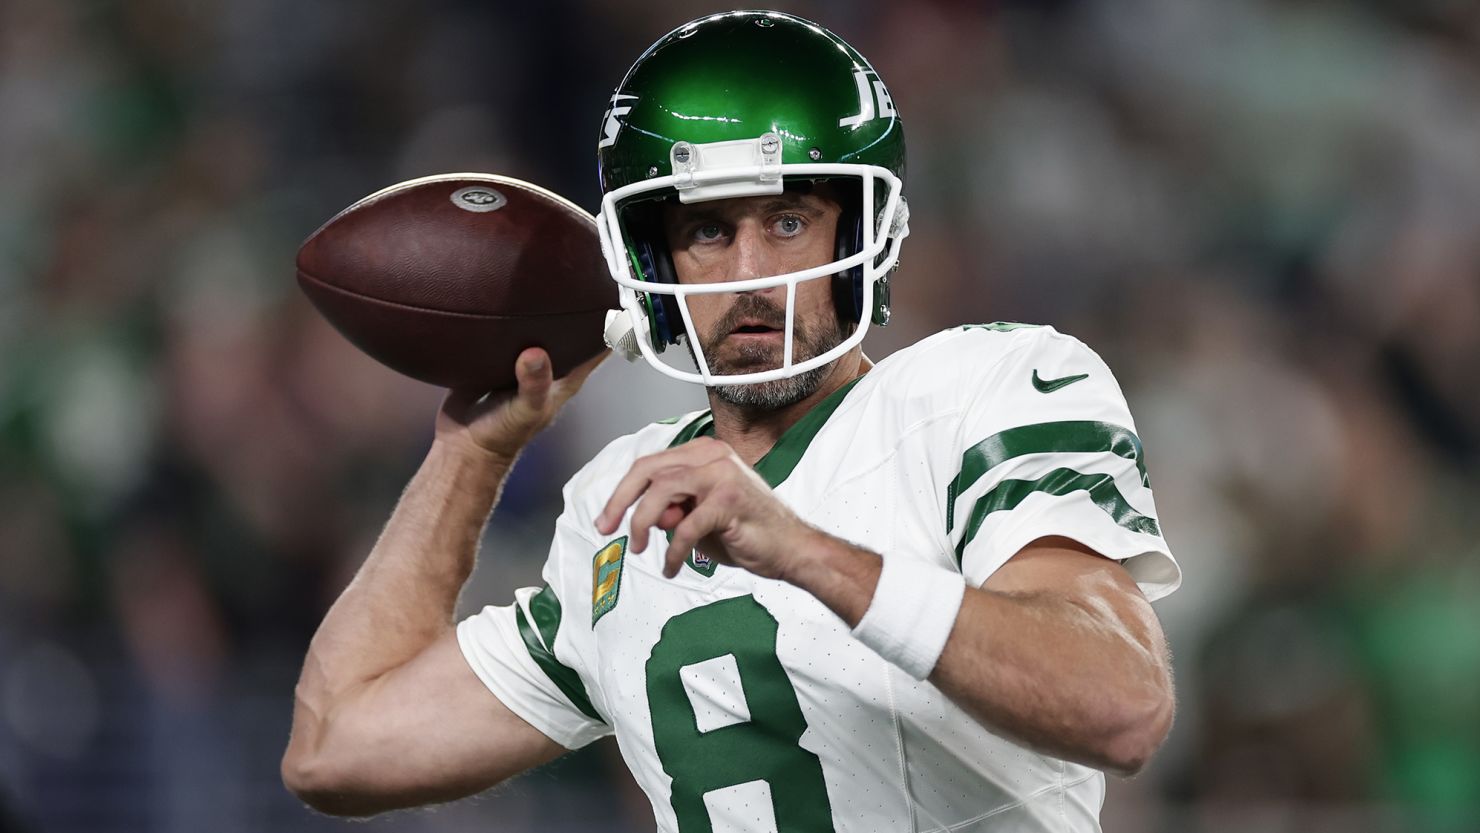 Jets Draft Strategy Focuses on Protecting Aaron Rodgers Amid High Stakes